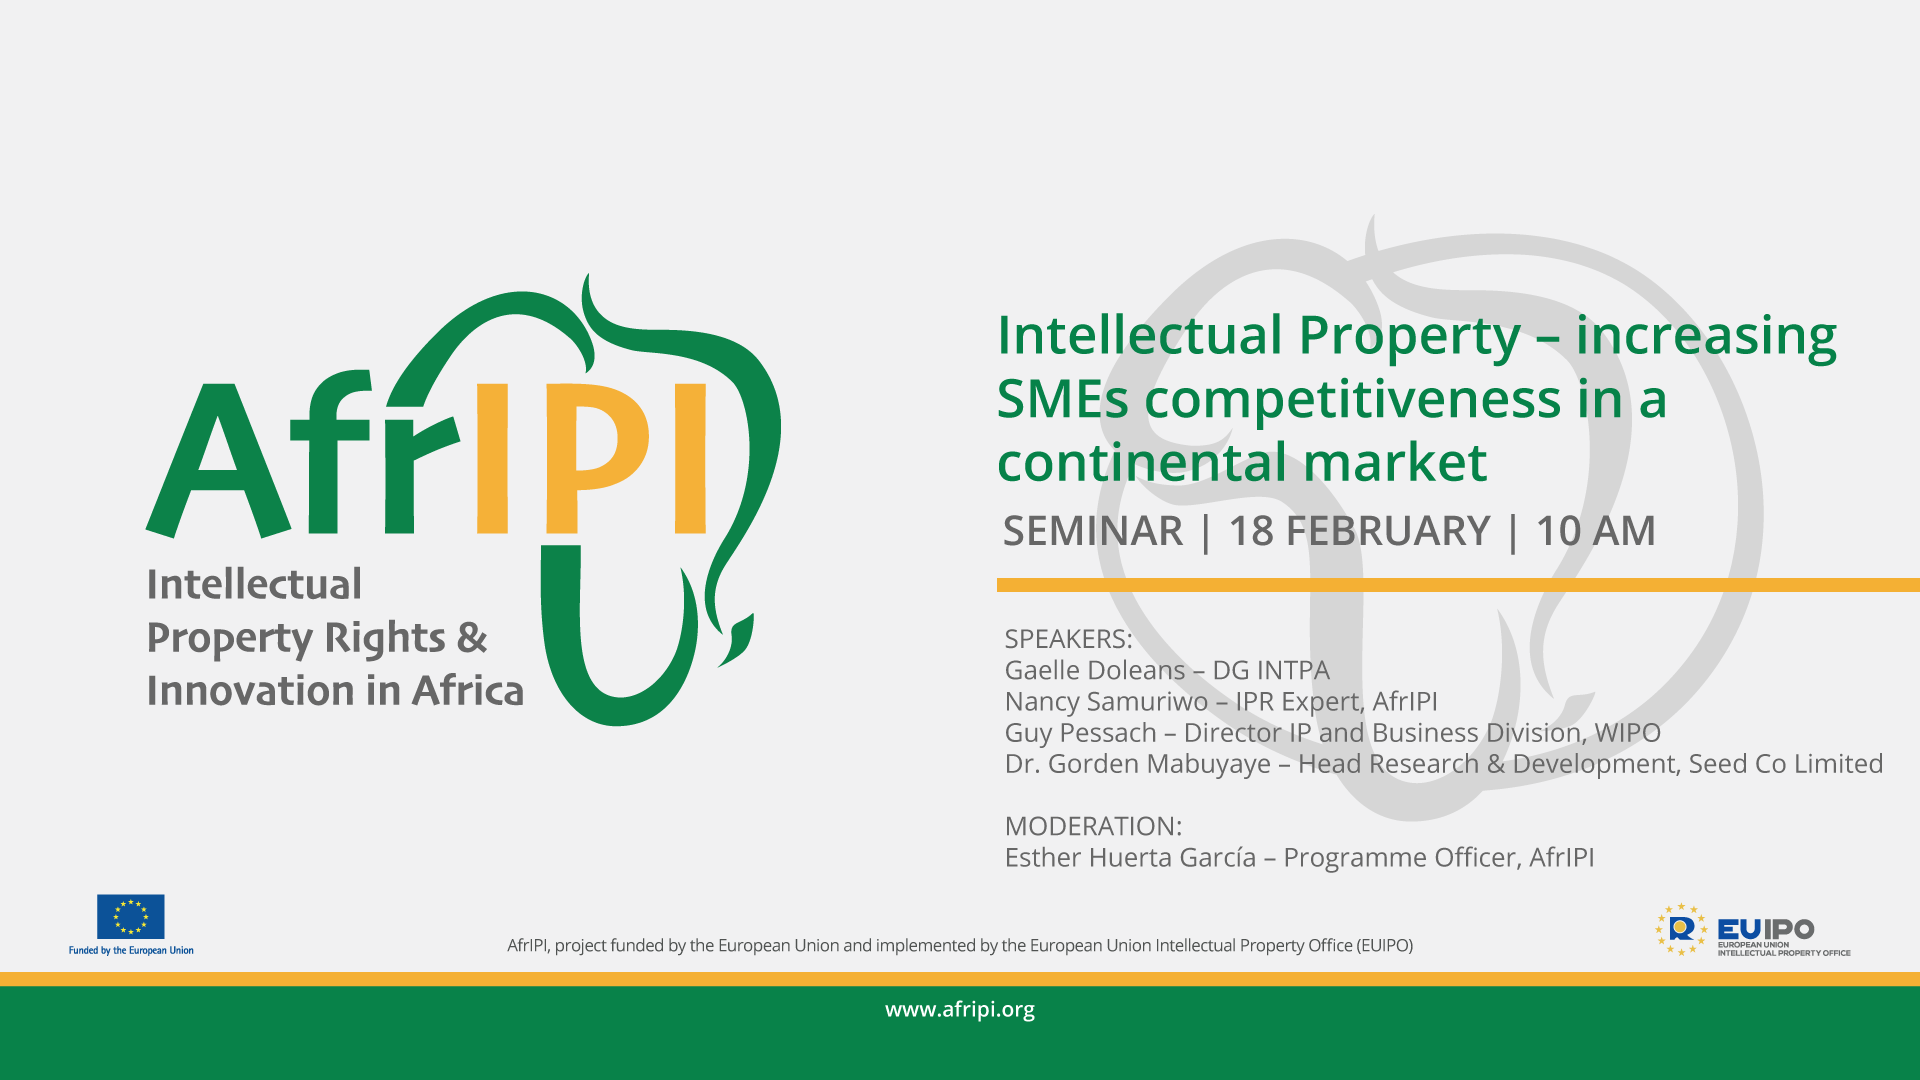 Afripi logo and title of the event